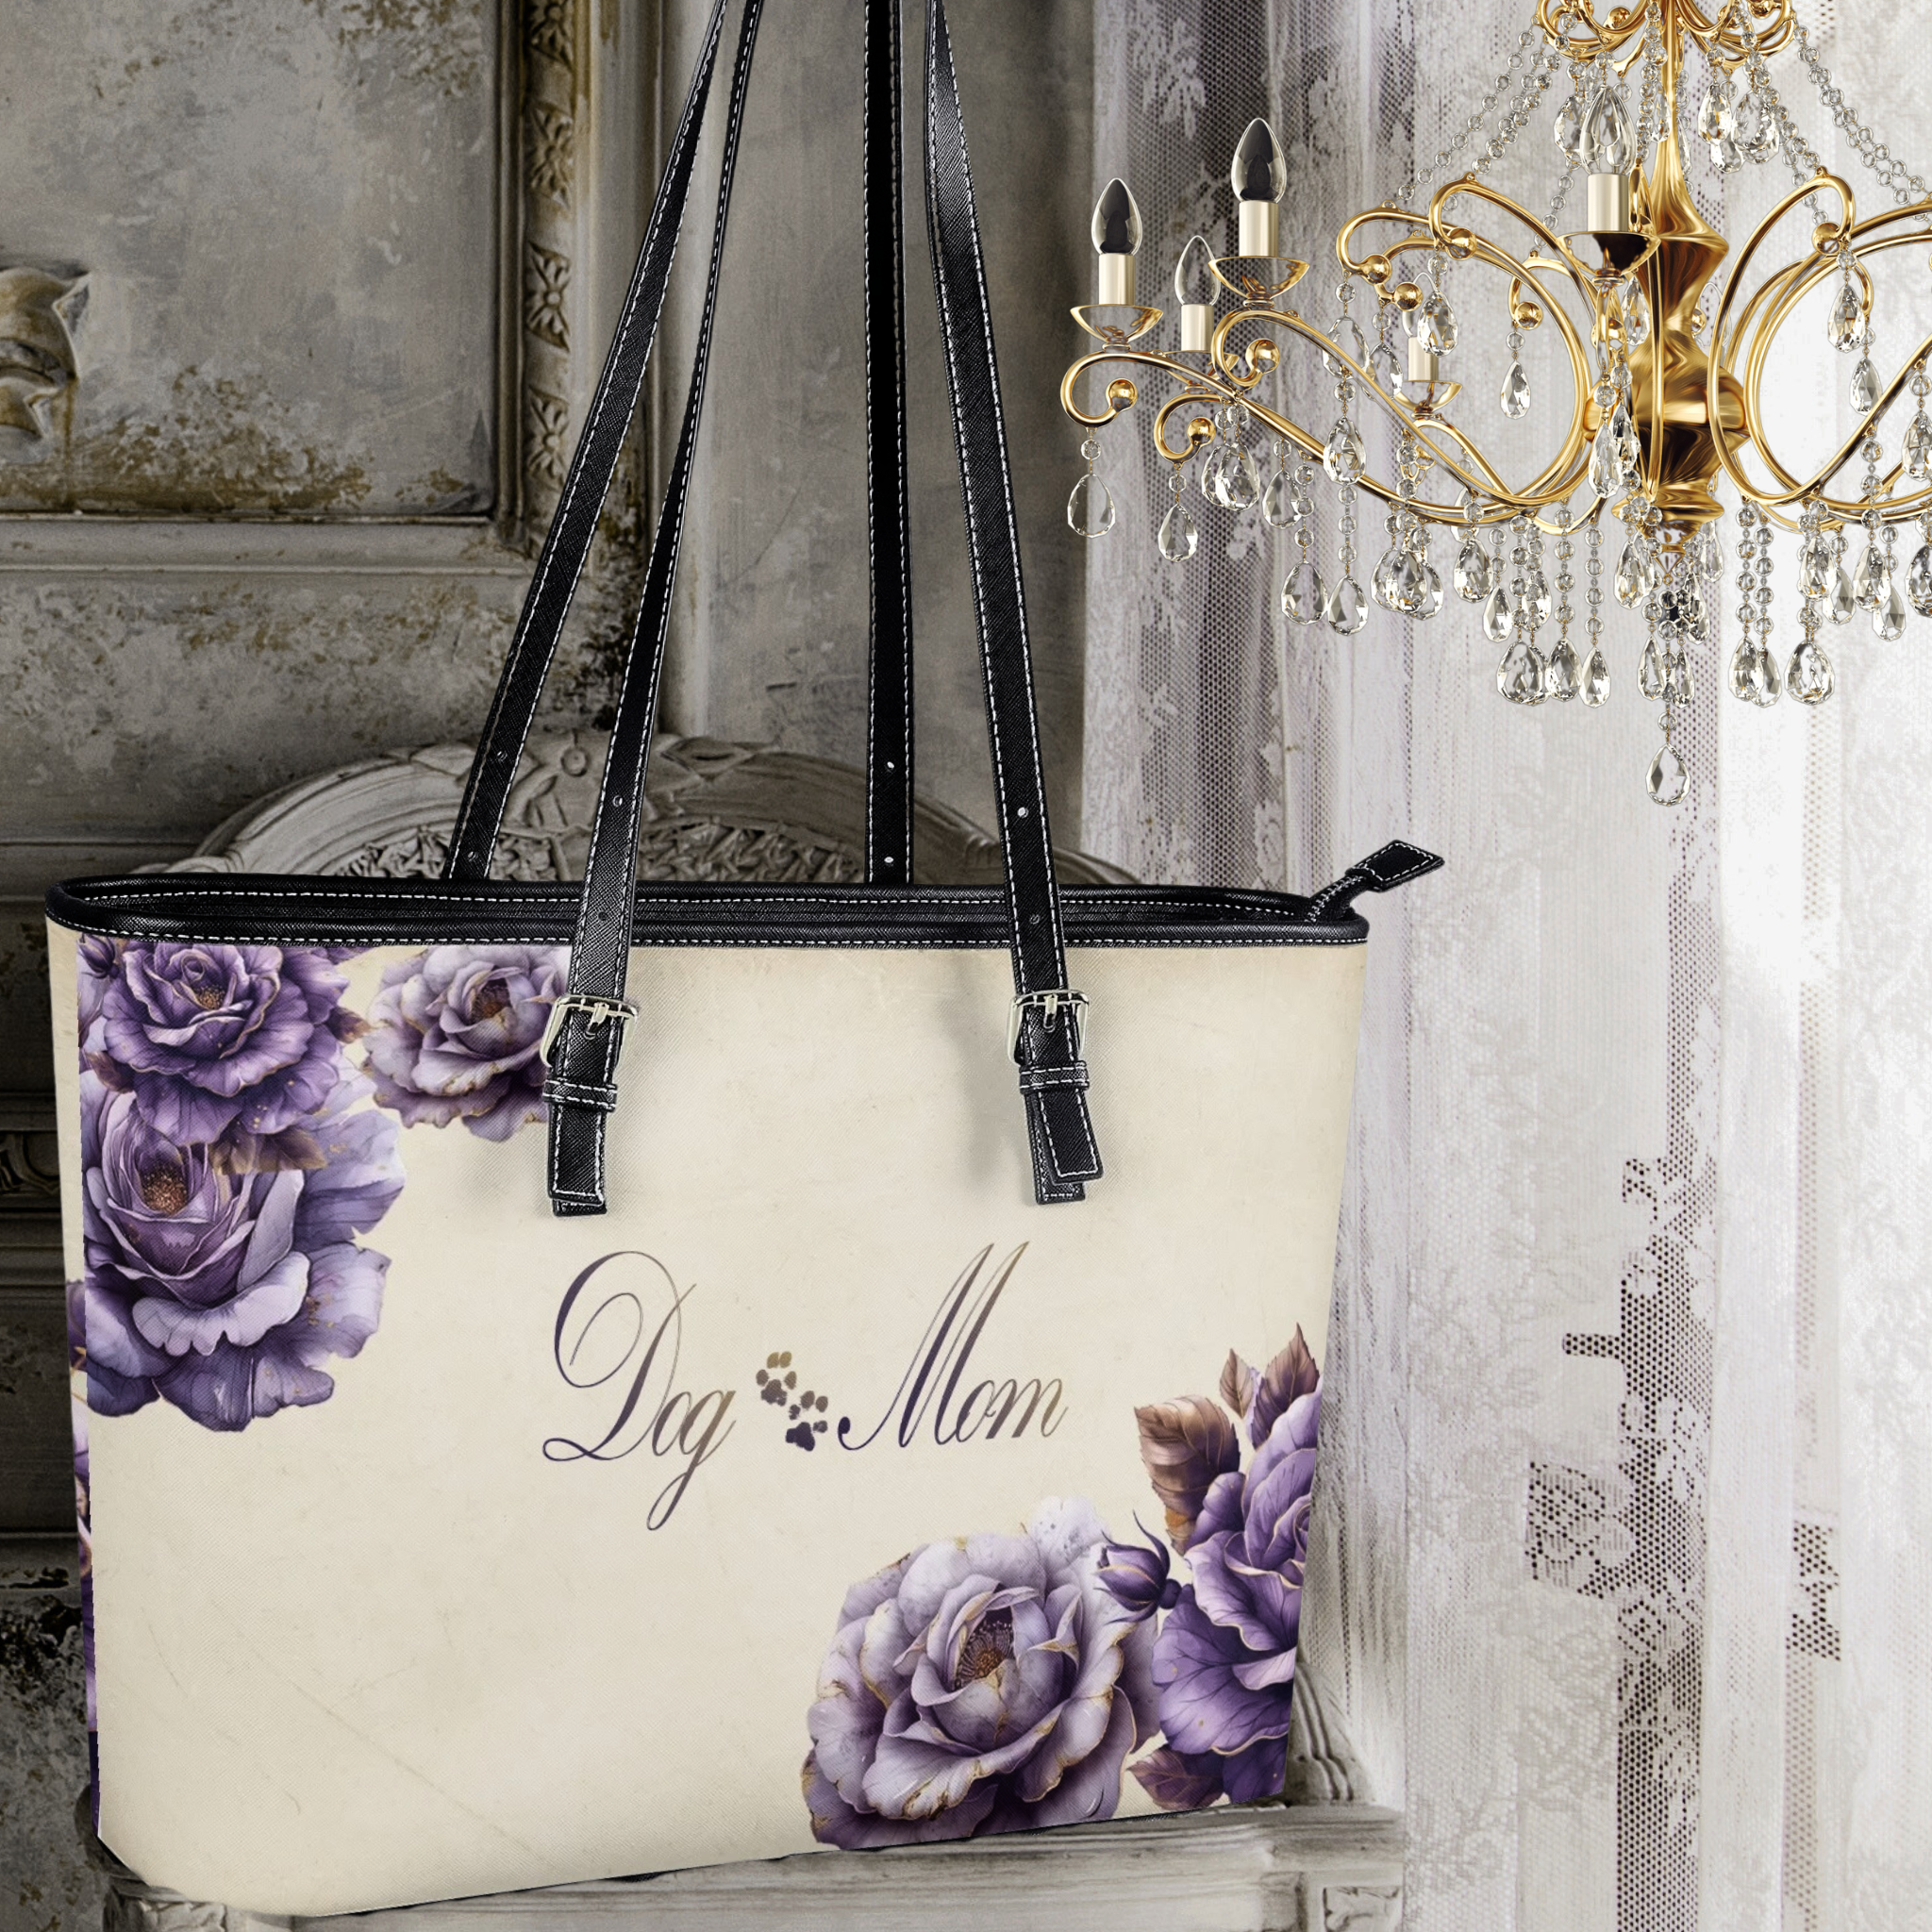 Dog Mom French Country Lavender Rose and Ivory Handbag - dog-mom-french-lavender-rose-country-handbag